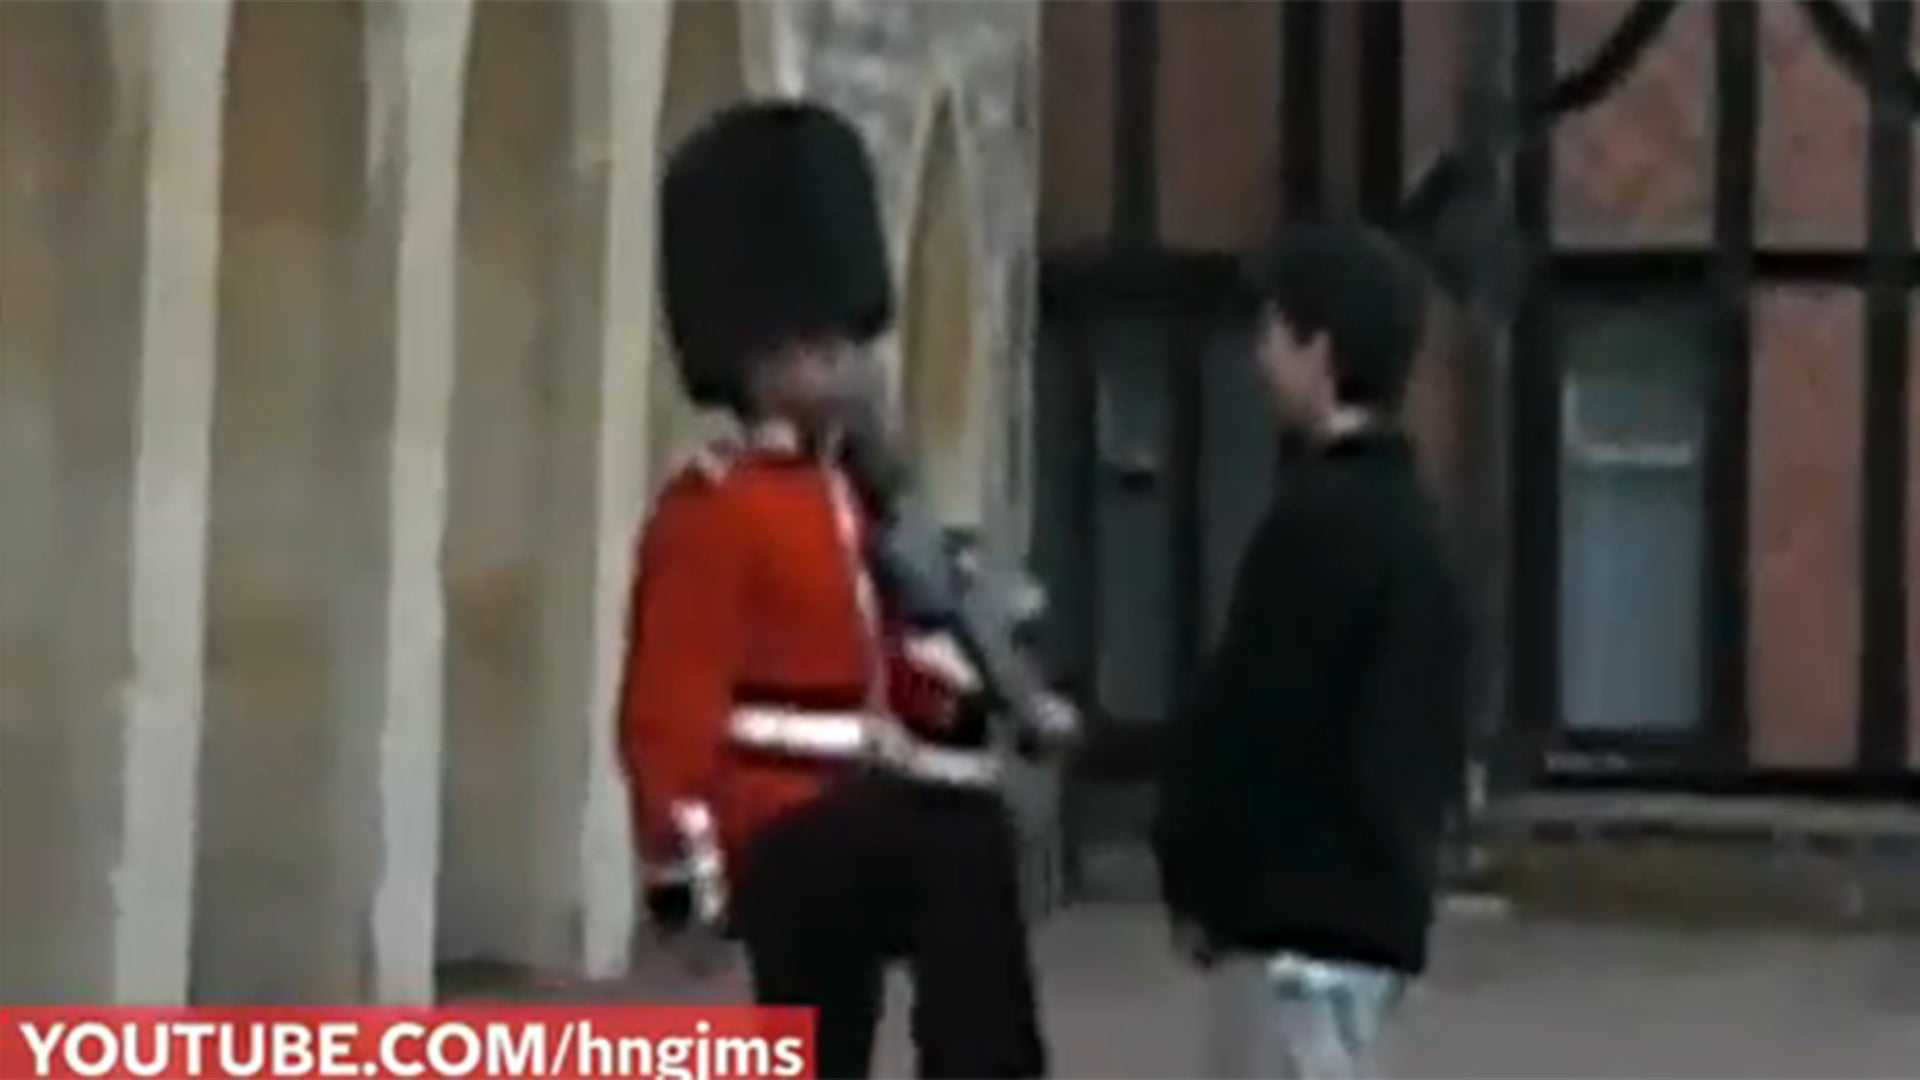 He even stares the Queen's Guard straight in the face.